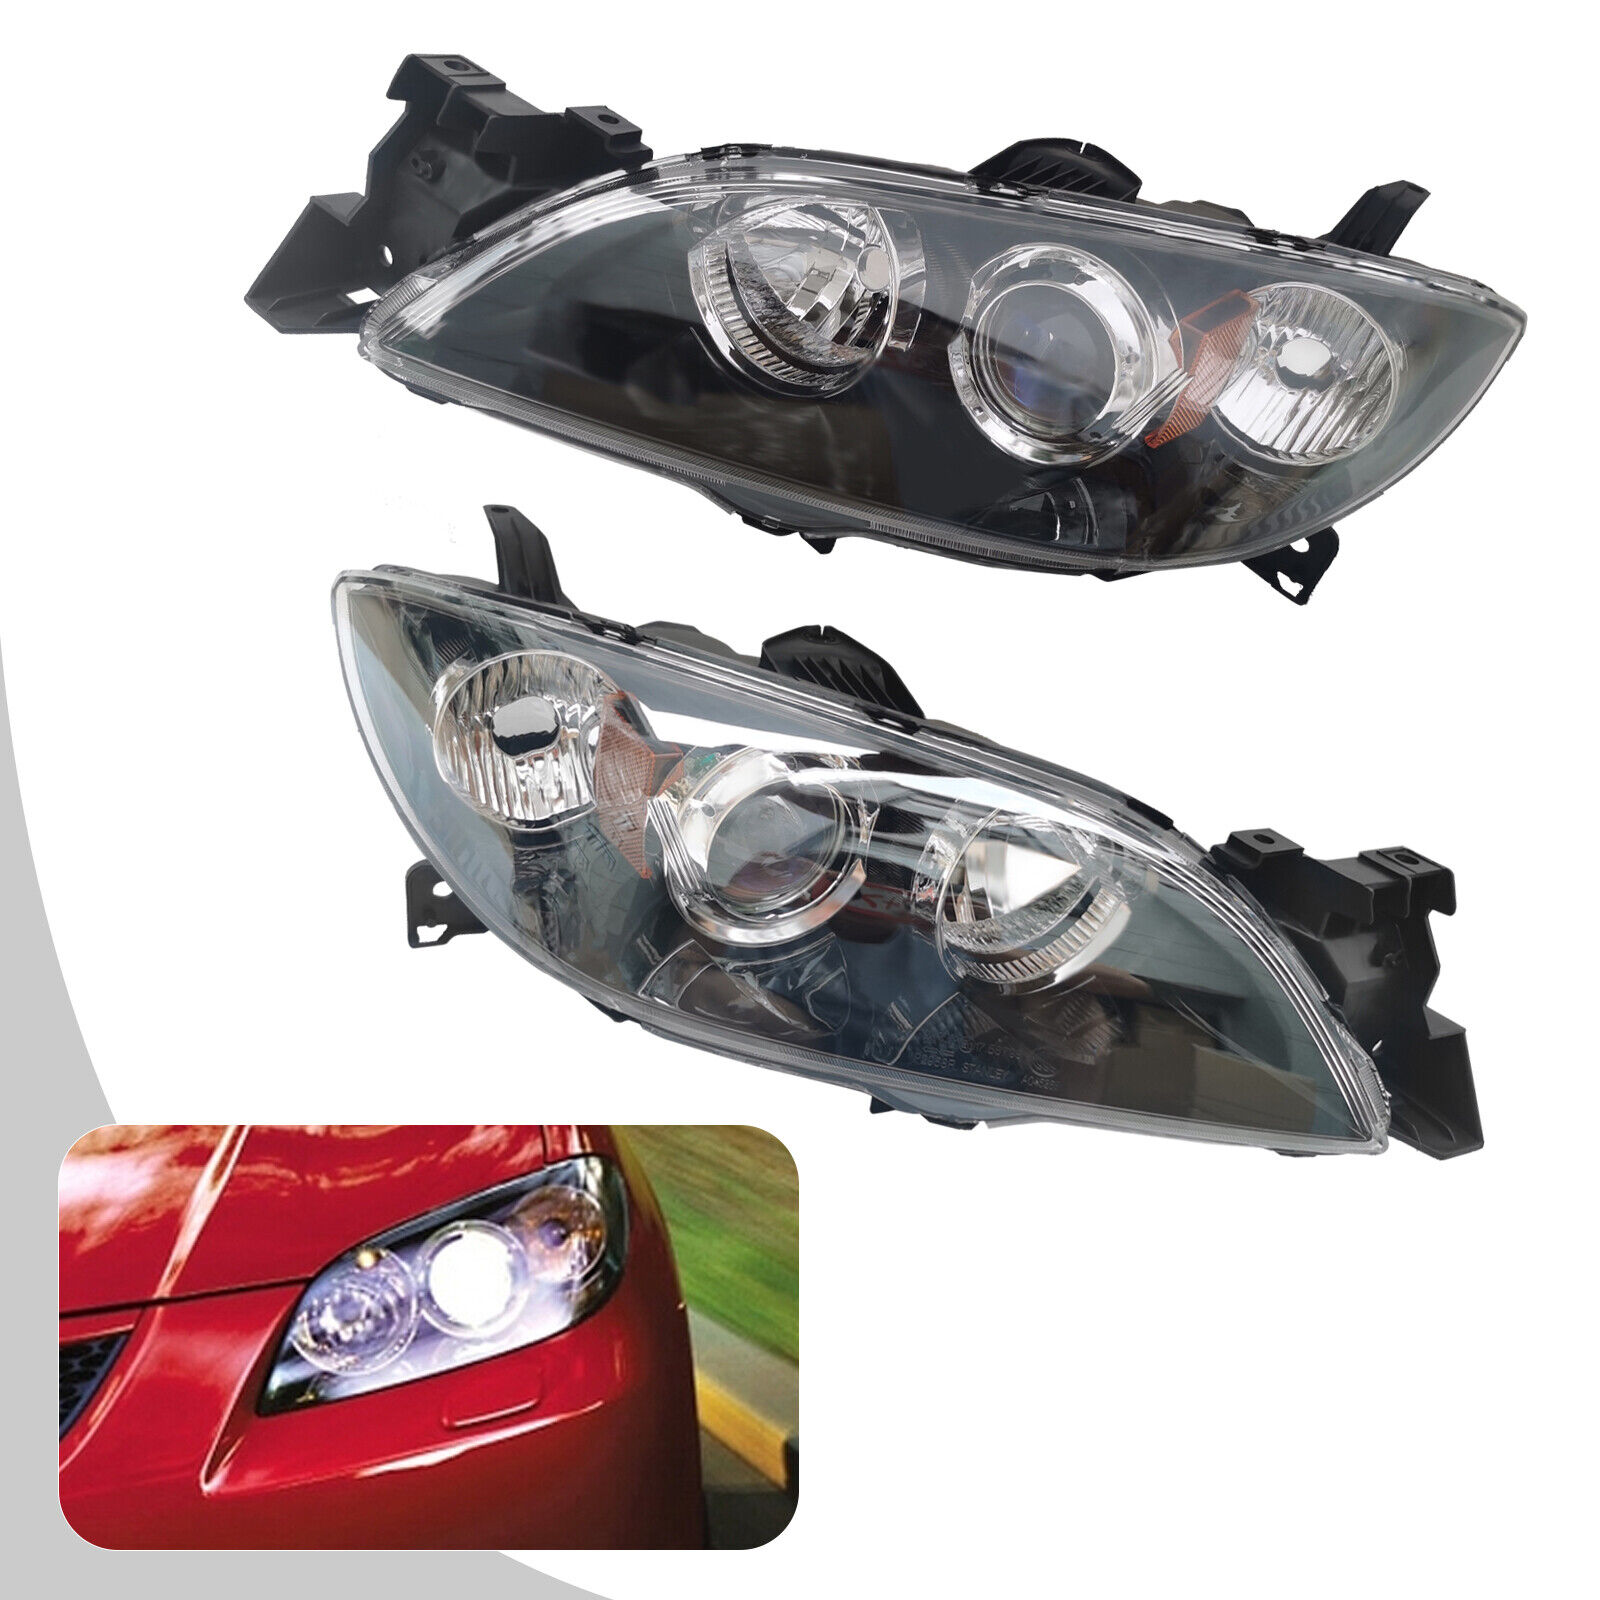 Halogen Headlights Front Lamps Pair Set for 04-09 Mazda 3 Left & Right